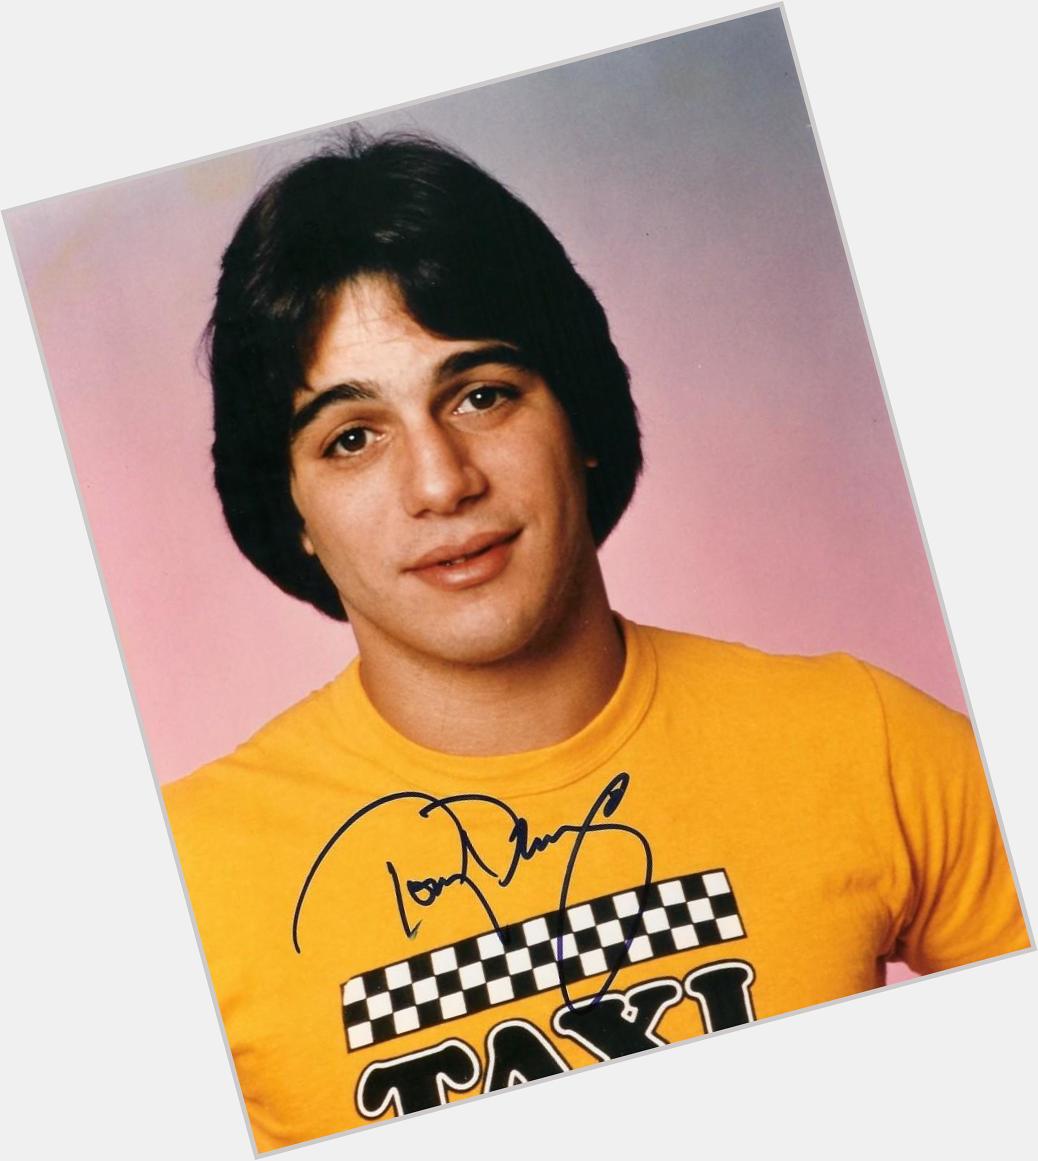 Campbell gave me this pic for Christmas.
Happy birthday Tony Danza,  64 today.
What\s your favourite Taxi moment? 